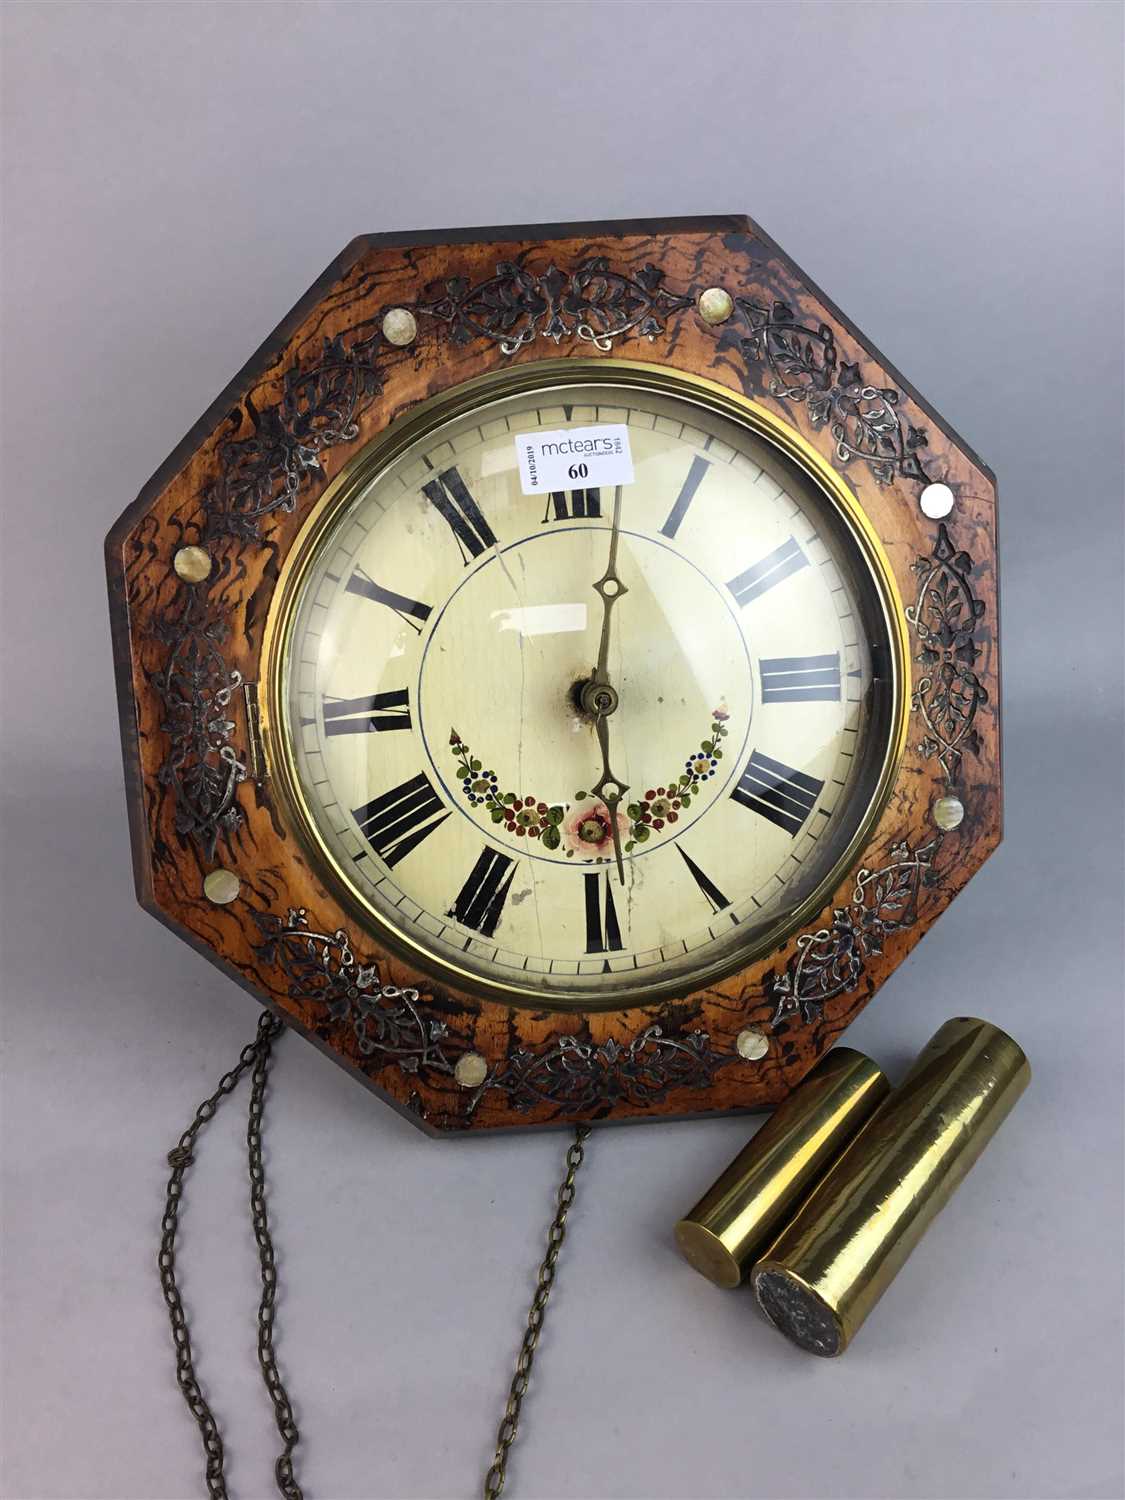 Lot 60 - AN EARLY 20TH CENTURY WAG AT THE WALL CLOCK